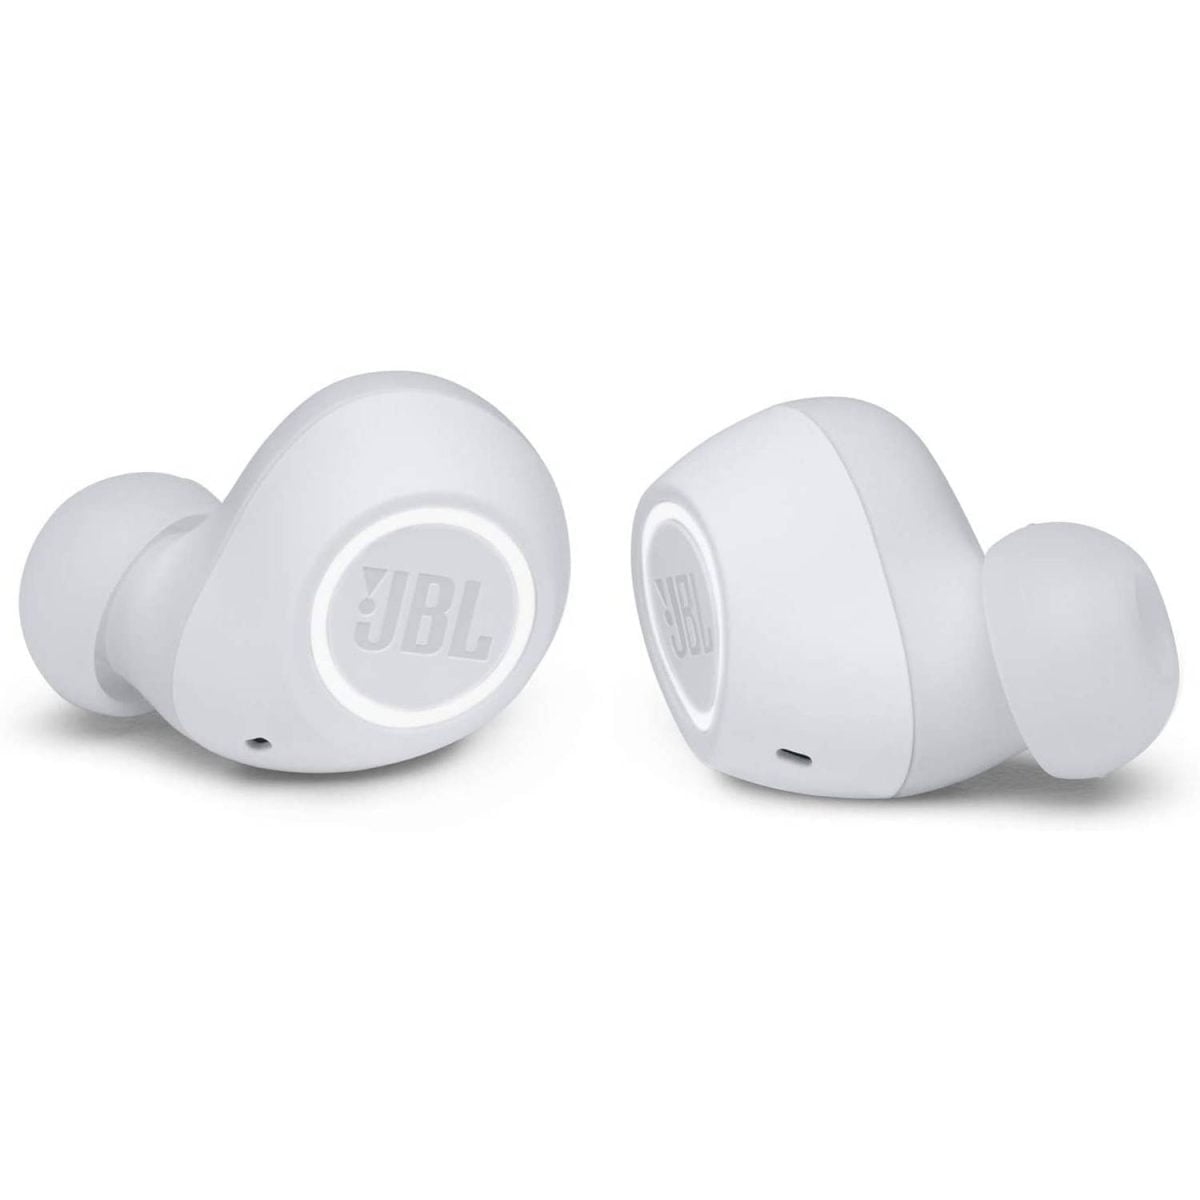 61 Efc0 Mql. Ac Sl1500 Smart Crop C0 5 0 5 1500X1500 70 Jbl &Lt;H1 Class=&Quot;Product-Title&Quot;&Gt;Jbl Free 2 True Wireless In-Ear Headphones - White&Lt;/H1&Gt; &Lt;Ul Class=&Quot;A-Unordered-List A-Vertical A-Spacing-Mini&Quot;&Gt; &Lt;Li&Gt;&Lt;Span Class=&Quot;A-List-Item&Quot;&Gt;Enjoy An Entire Day Of Wireless Audio, With 6 Hours Of Continuous Playback And 18 Hours Of Backup Power From The Charging Case. Easily Recharge With A Type-C Charging Case.&Lt;/Span&Gt;&Lt;/Li&Gt; &Lt;Li&Gt;&Lt;Span Class=&Quot;A-List-Item&Quot;&Gt;Comfort Stay. Secure Fit&Lt;/Span&Gt;&Lt;/Li&Gt; &Lt;Li&Gt;&Lt;Span Class=&Quot;A-List-Item&Quot;&Gt;Dual Connect Makes Your Life Easier&Lt;/Span&Gt;&Lt;/Li&Gt; &Lt;Li&Gt;&Lt;Span Class=&Quot;A-List-Item&Quot;&Gt;Brand : Jbl&Lt;/Span&Gt;&Lt;/Li&Gt; &Lt;/Ul&Gt; Jbl Earphones Jbl Free 2 True Wireless In-Ear Headphones - White